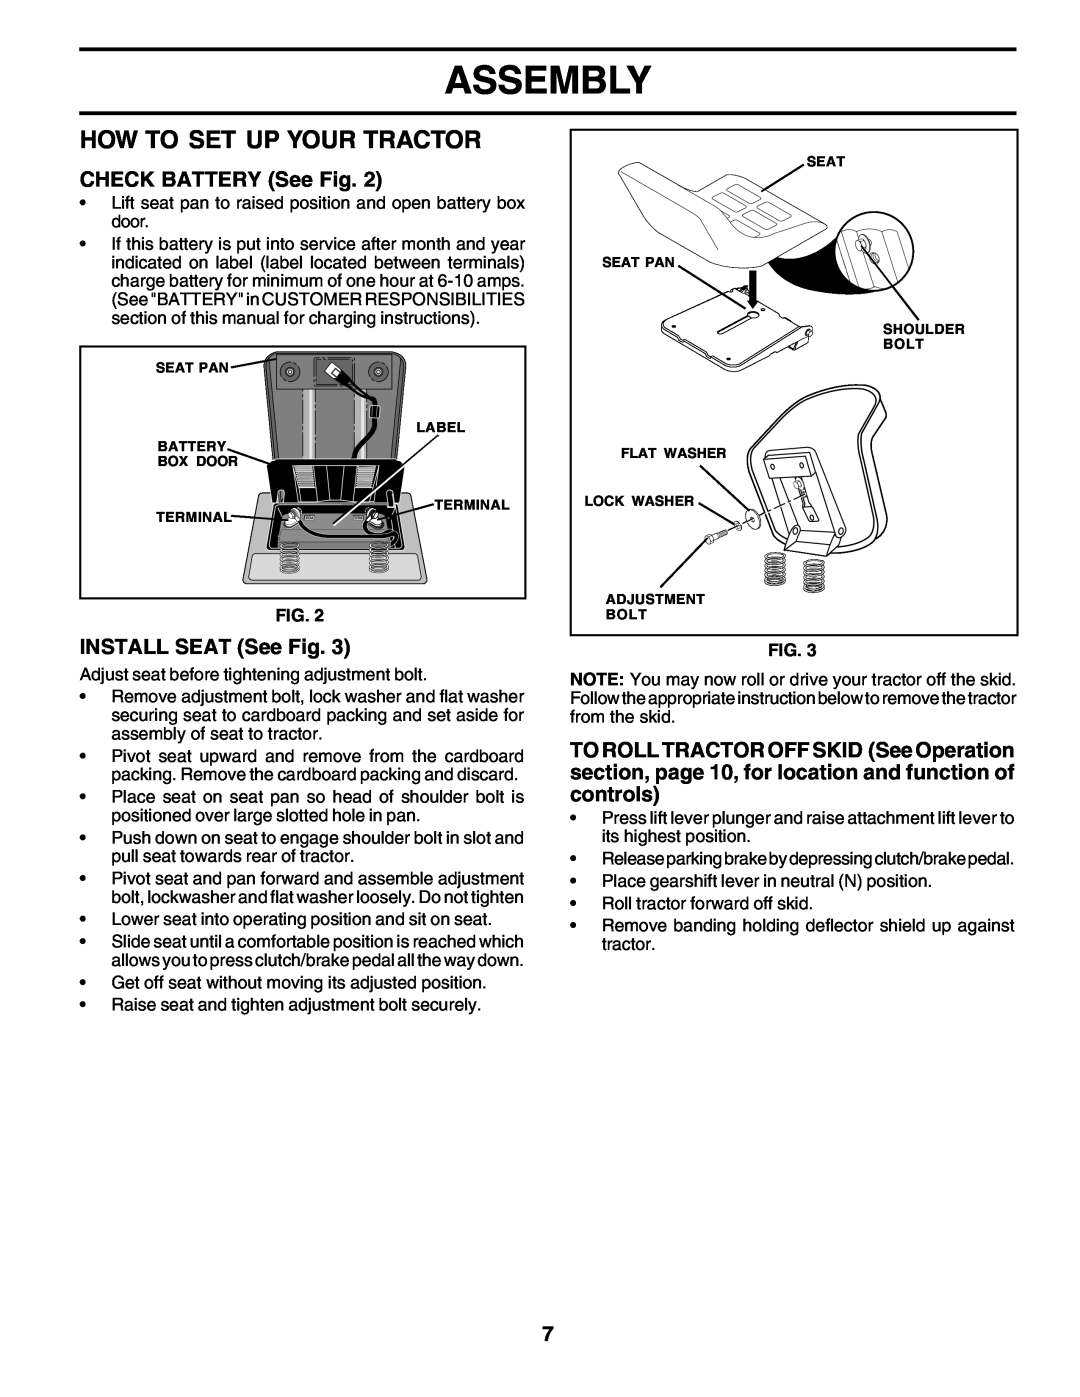 Poulan PO14542D manual How To Set Up Your Tractor, Assembly, CHECK BATTERY See Fig, INSTALL SEAT See Fig 